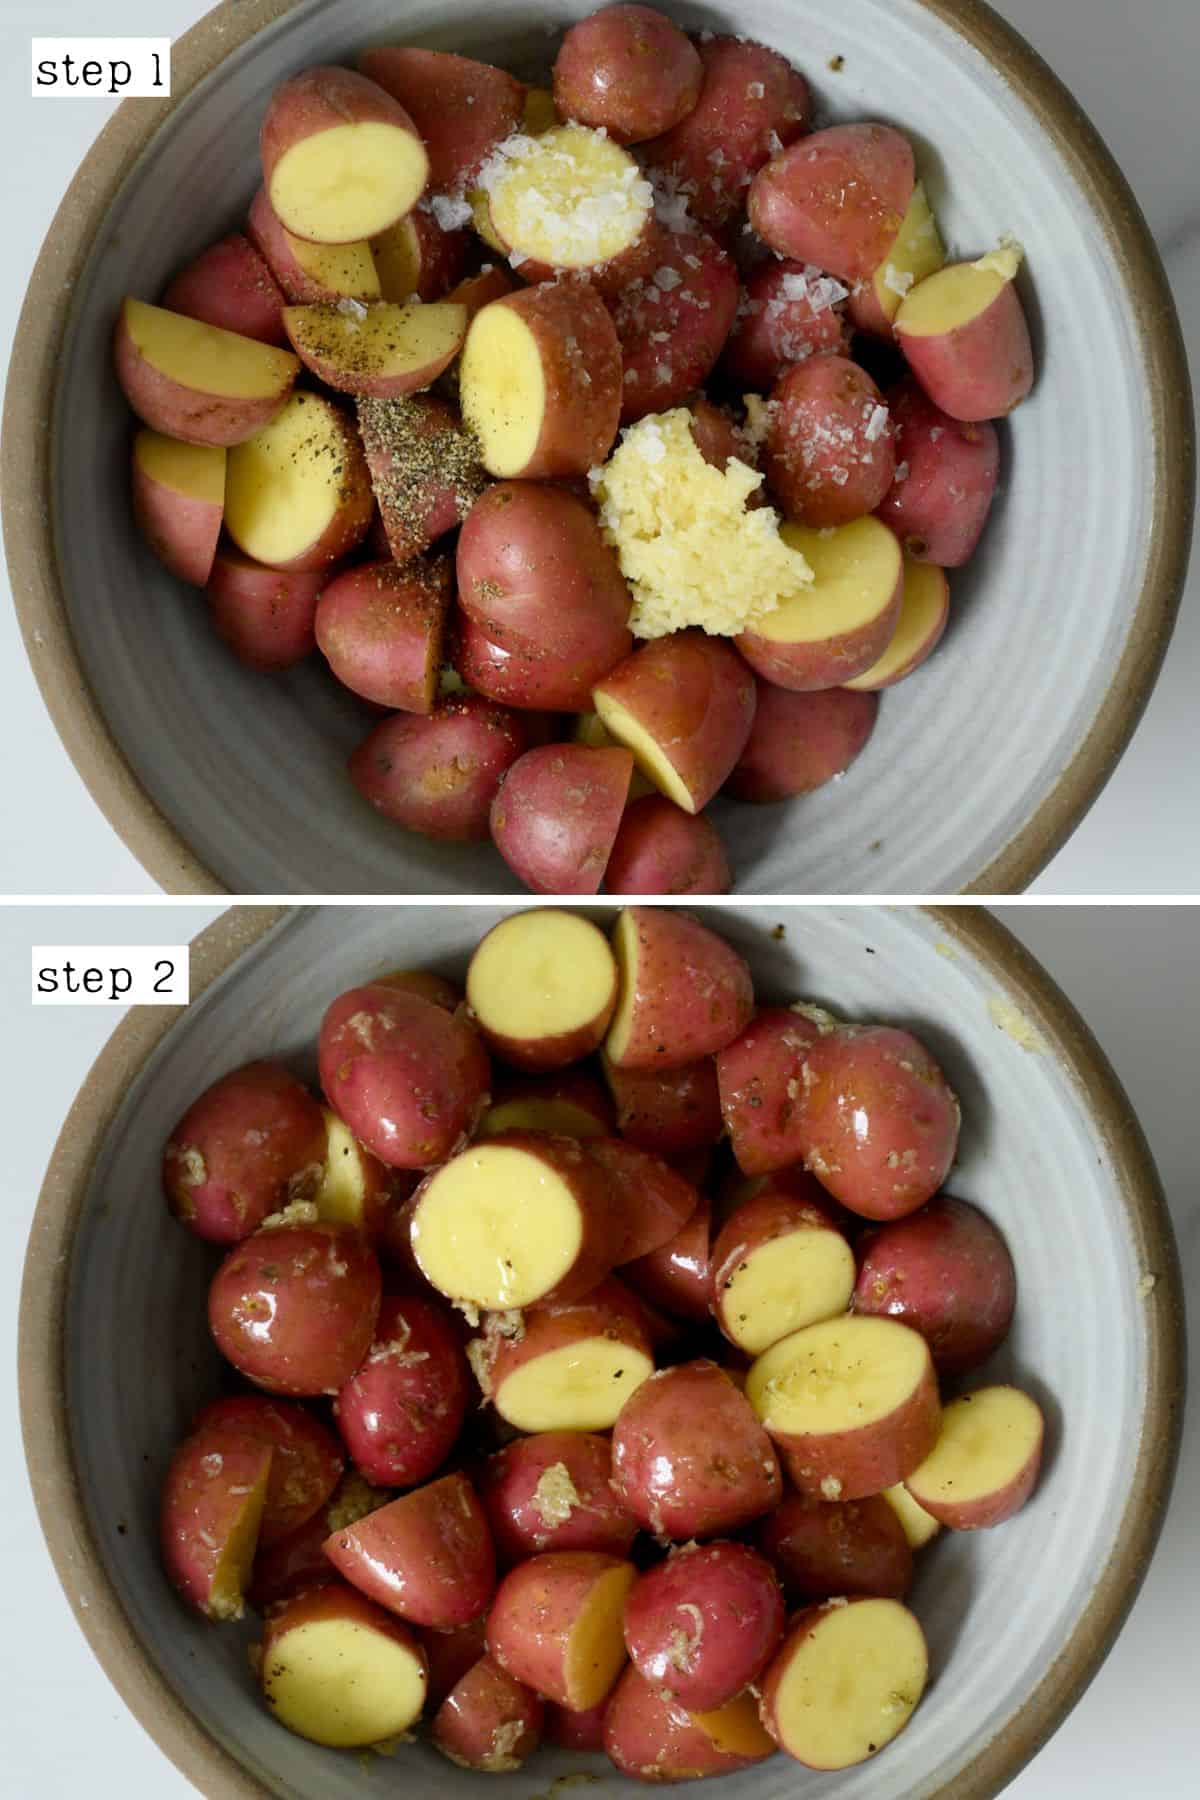 https://www.alphafoodie.com/wp-content/uploads/2022/09/Roasted-New-Red-Potatoes-Steps-for-preparing-new-red-potatoes-for-roasting.jpeg